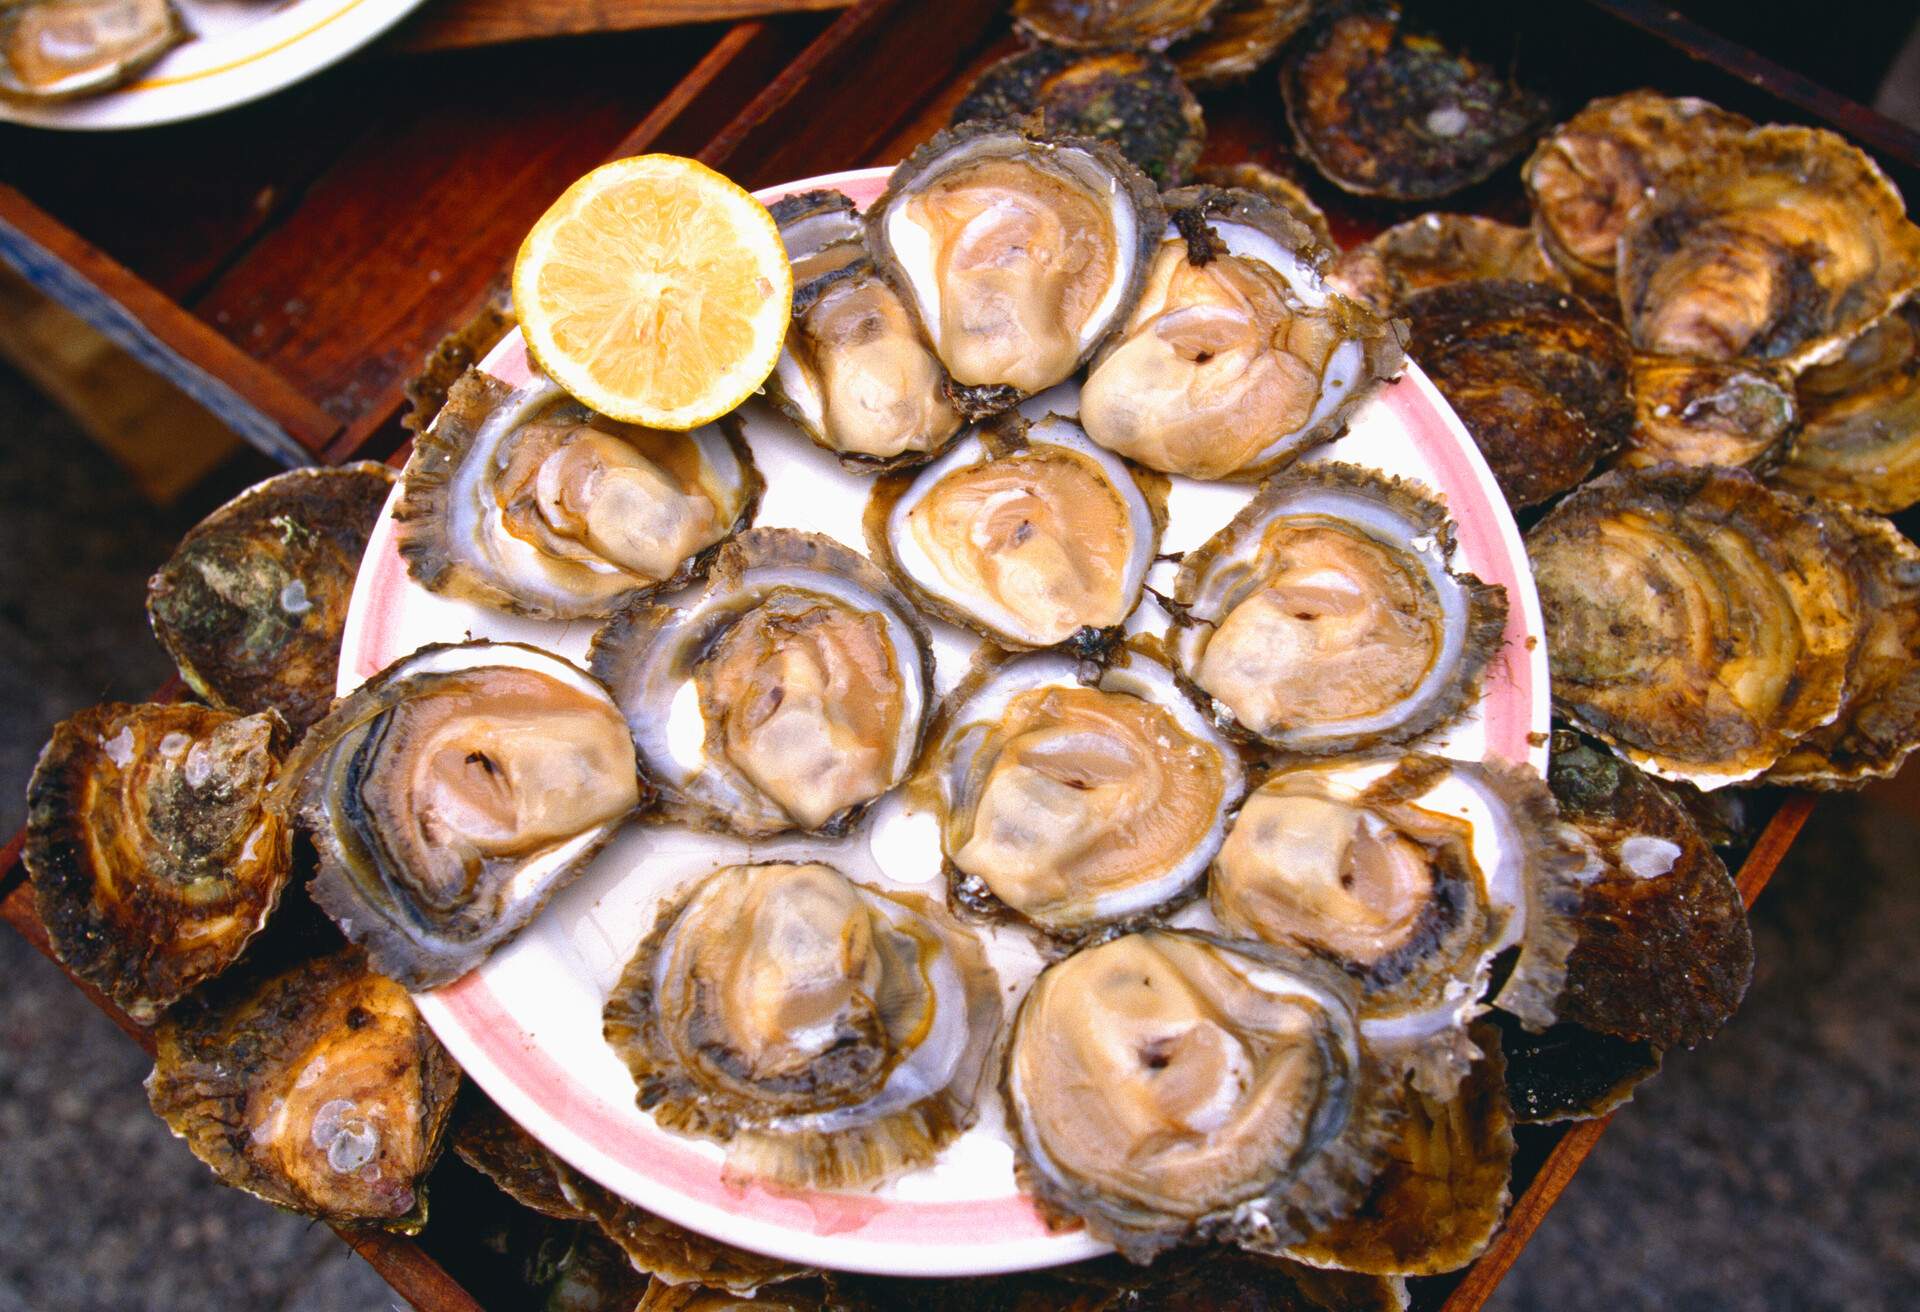 DEST_SPAIN_VIGO_THEME_FOOD_SEAFOOD_OYSTERS_GettyImages-541349698